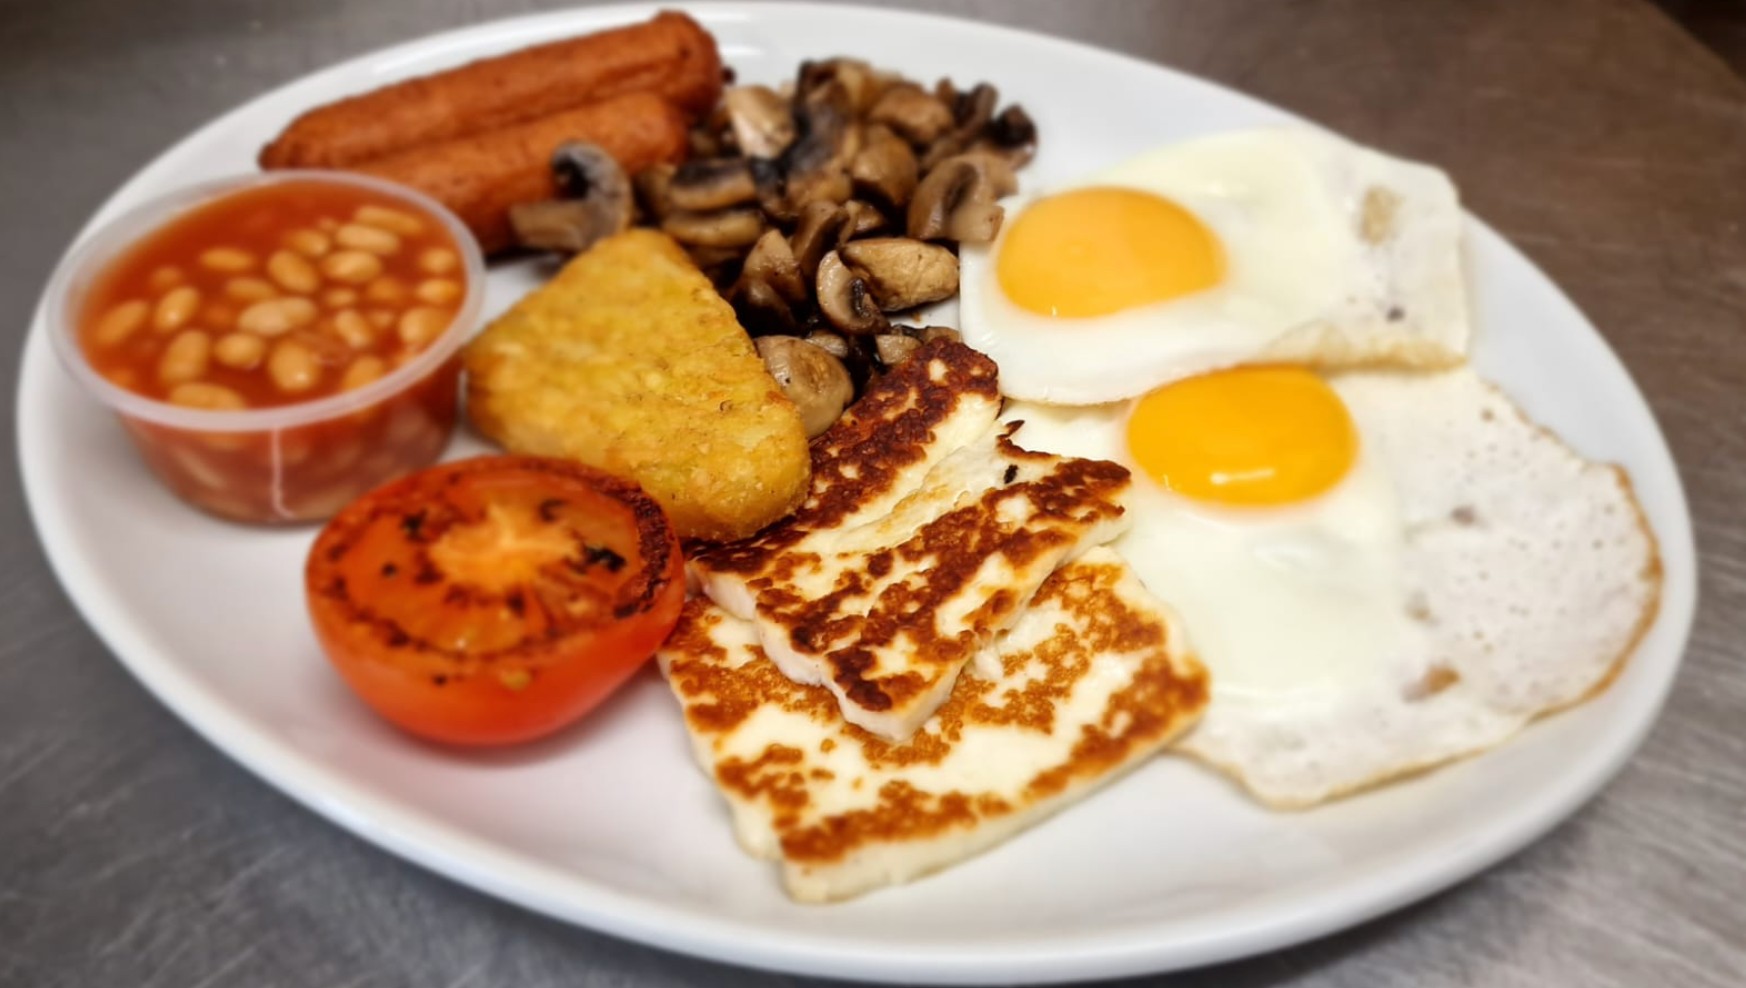 The Veggie Breakfast of dreams at RA Bar in Southport with Linda McCartney sausages, grilled halloumi, sautéed mushrooms, roasted tomato, egg, beans, and sourdough bread toasted